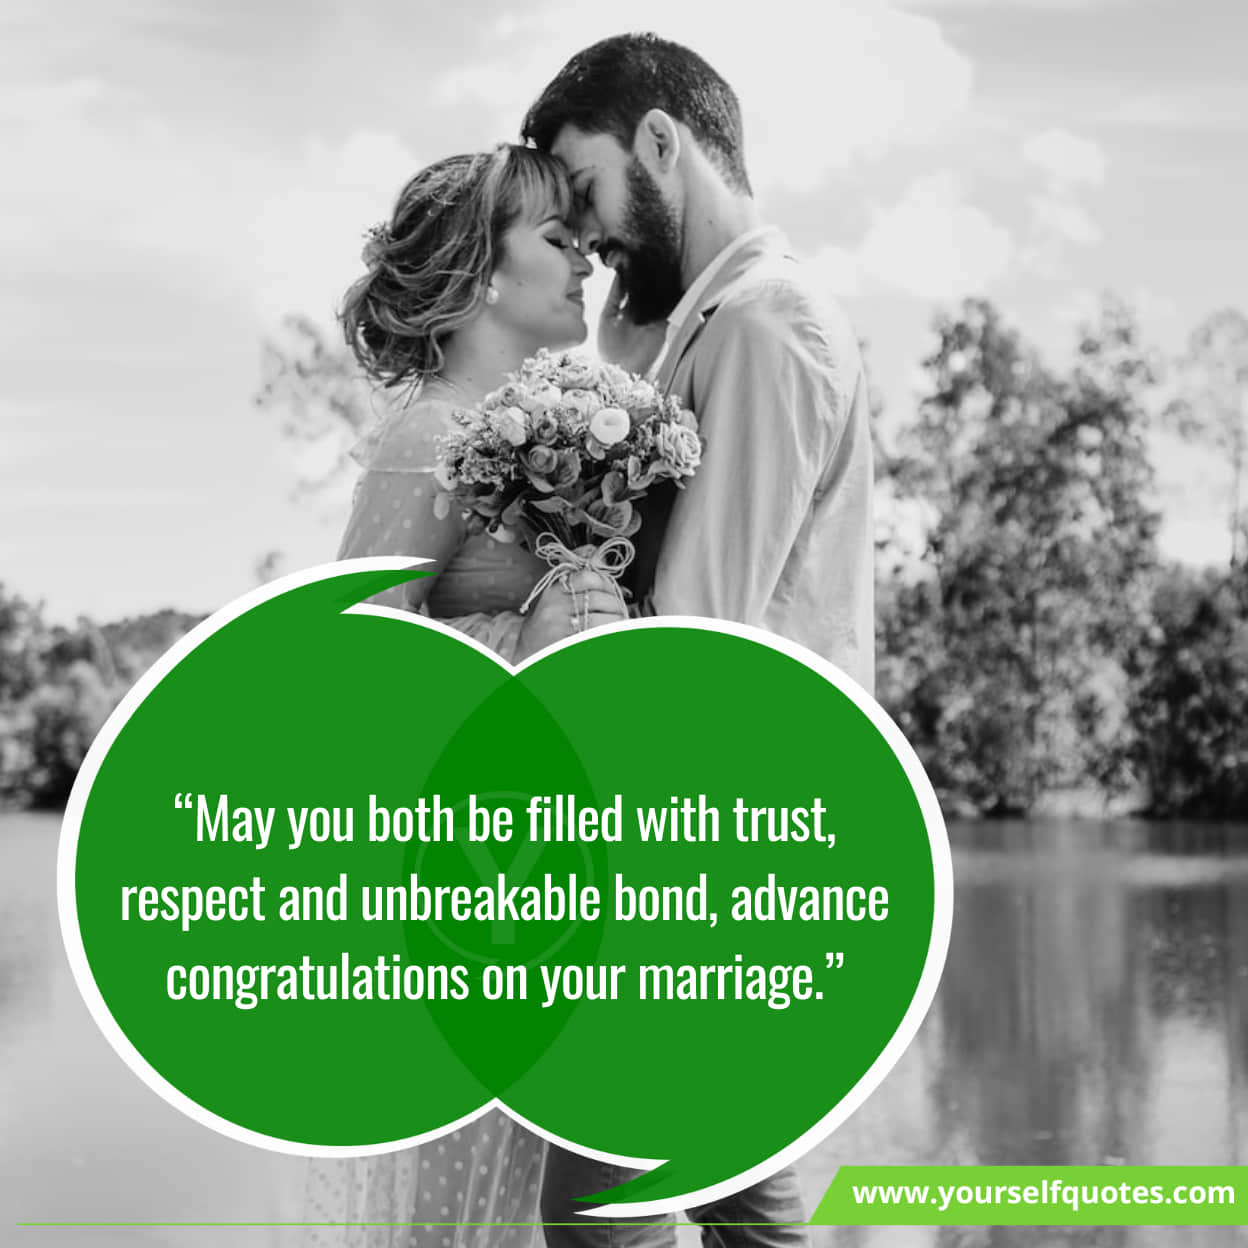 Inspiring Wedding Quotes To Share